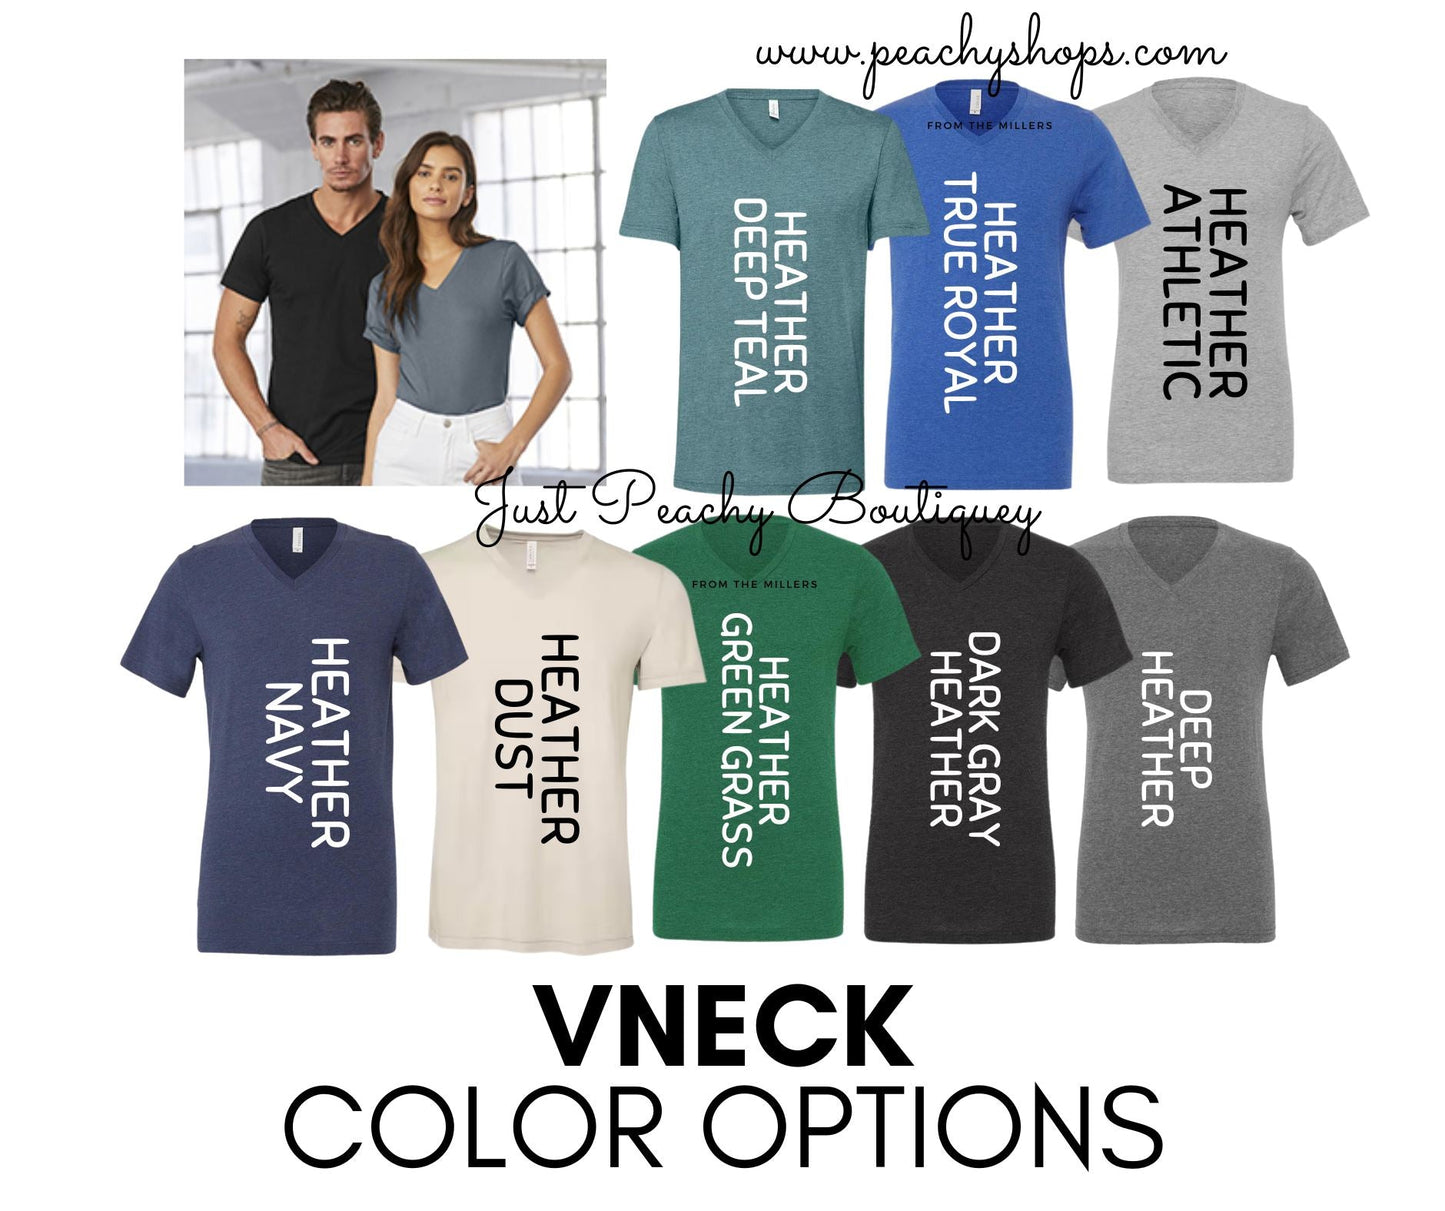 DON'T FORGET TO POSITIVITY T-SHIRT TANK OR SWEATSHIRT